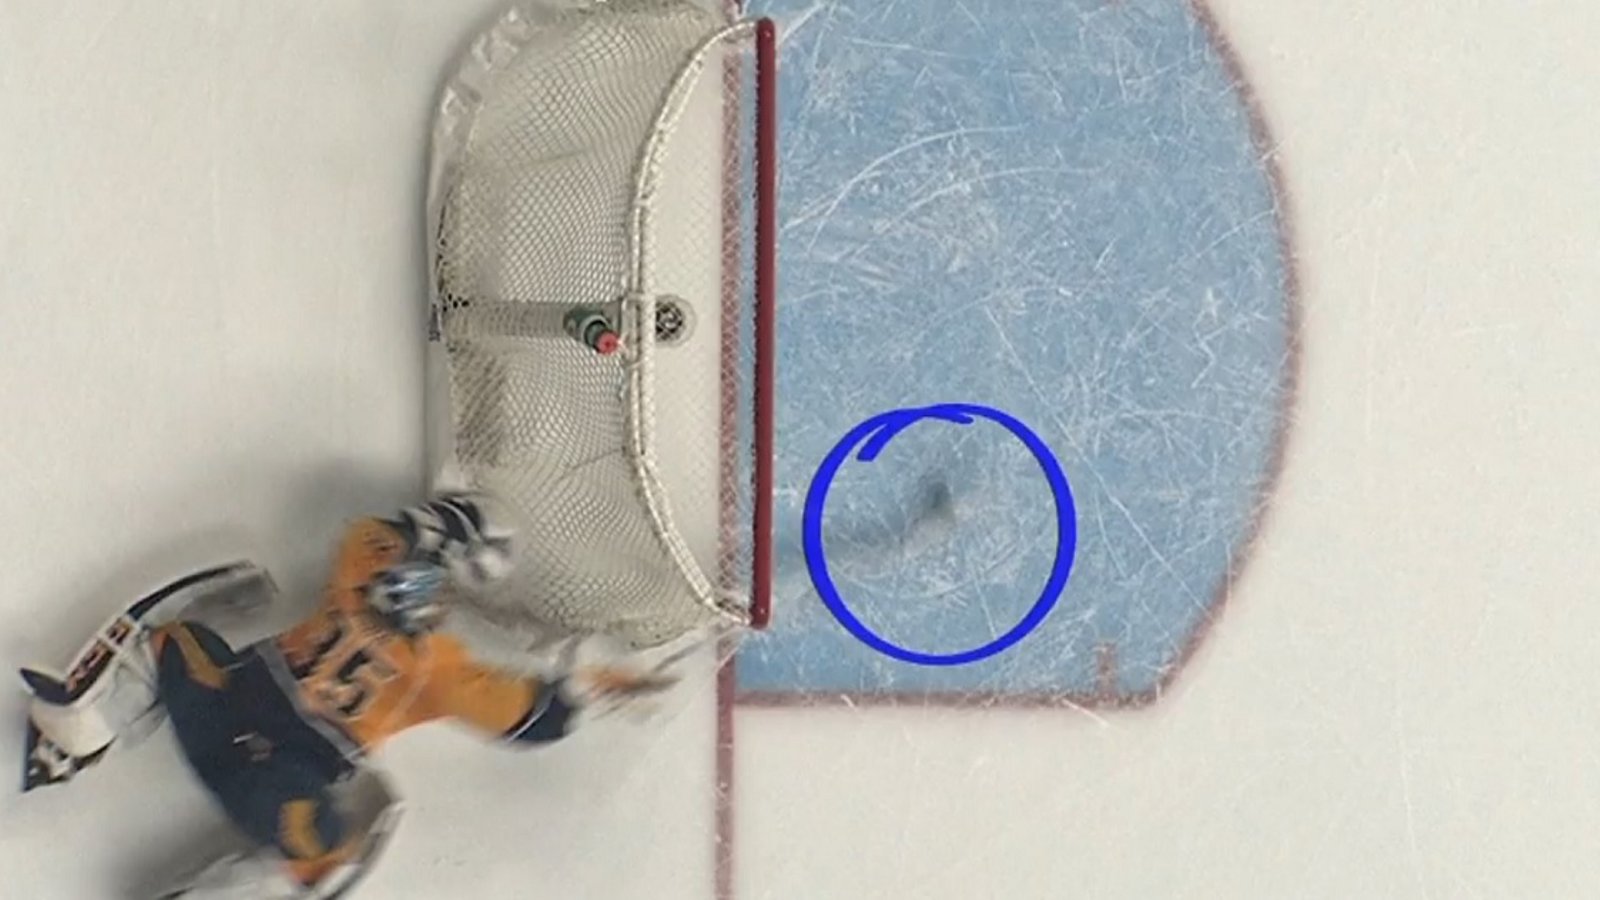 Pekka Rinne makes a mind-blowing save to keep Chicago off the scoreboard.